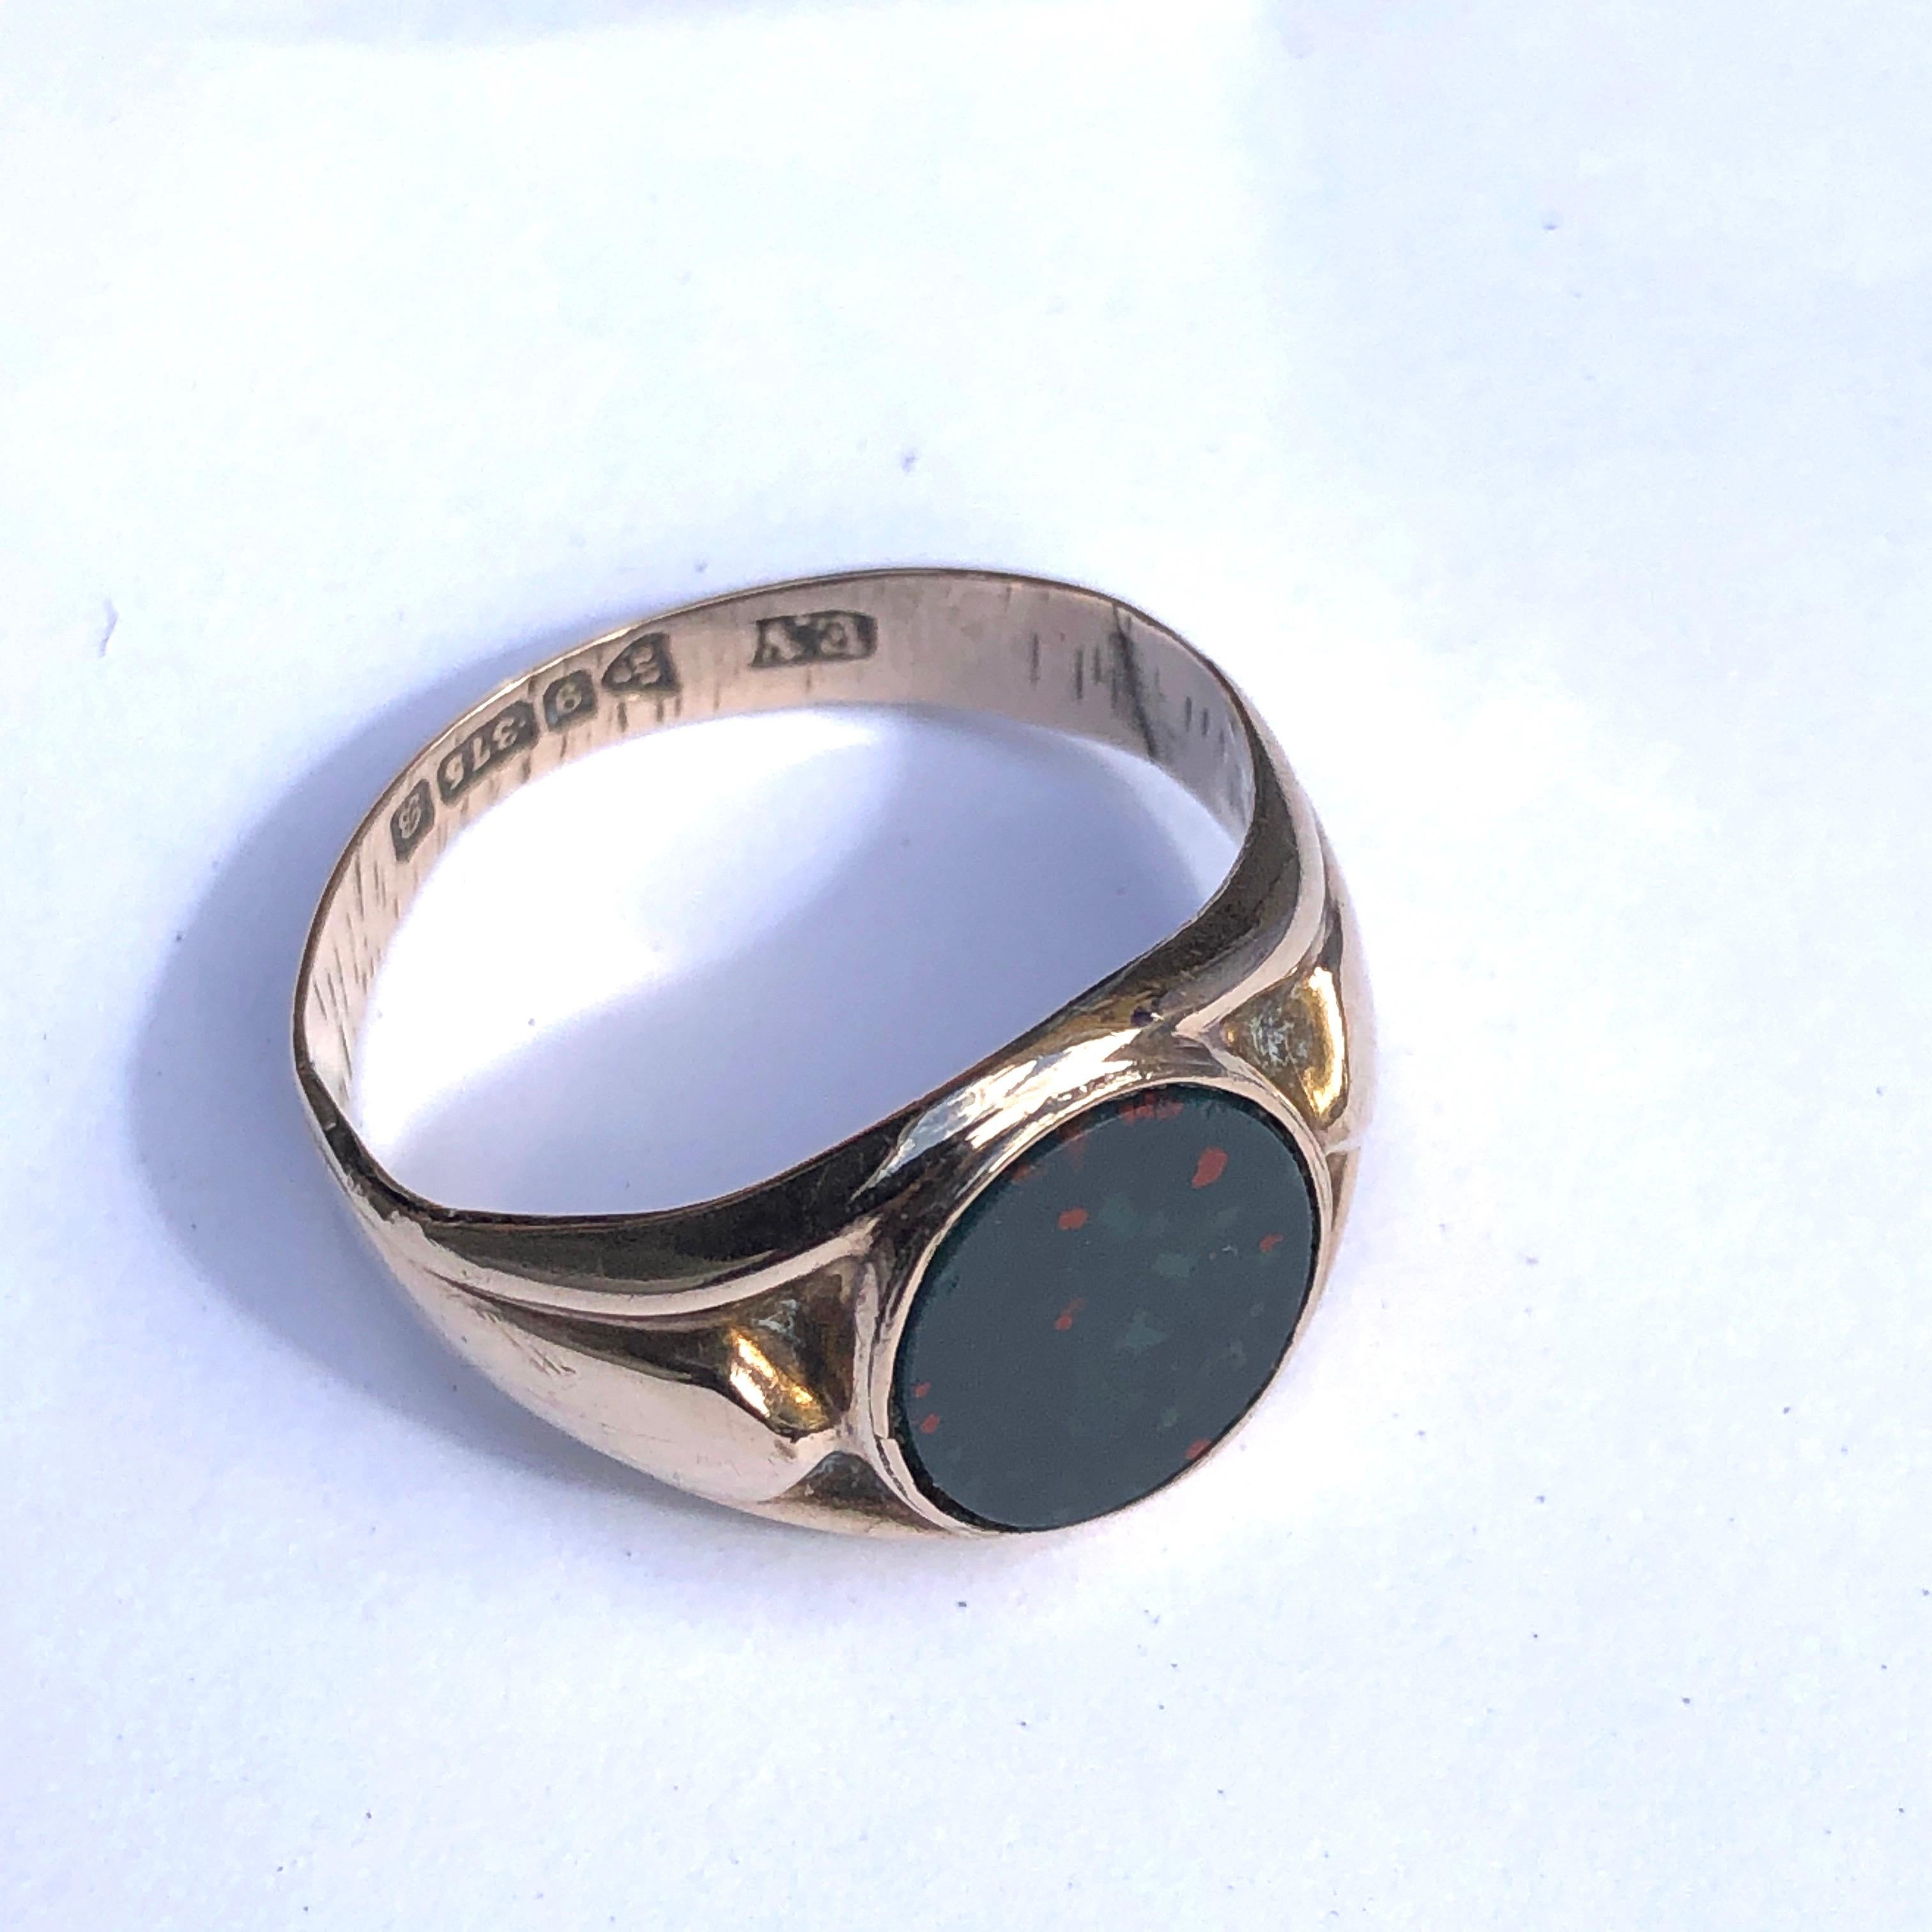 The slightly oval bloodstone set within this ring is a lovely rich and deep green colour with the bright red flecks as you would expect from a bloodstone. The ring itself is modelled in smooth and glossy 9ct gold and almost resembles folded fabric.